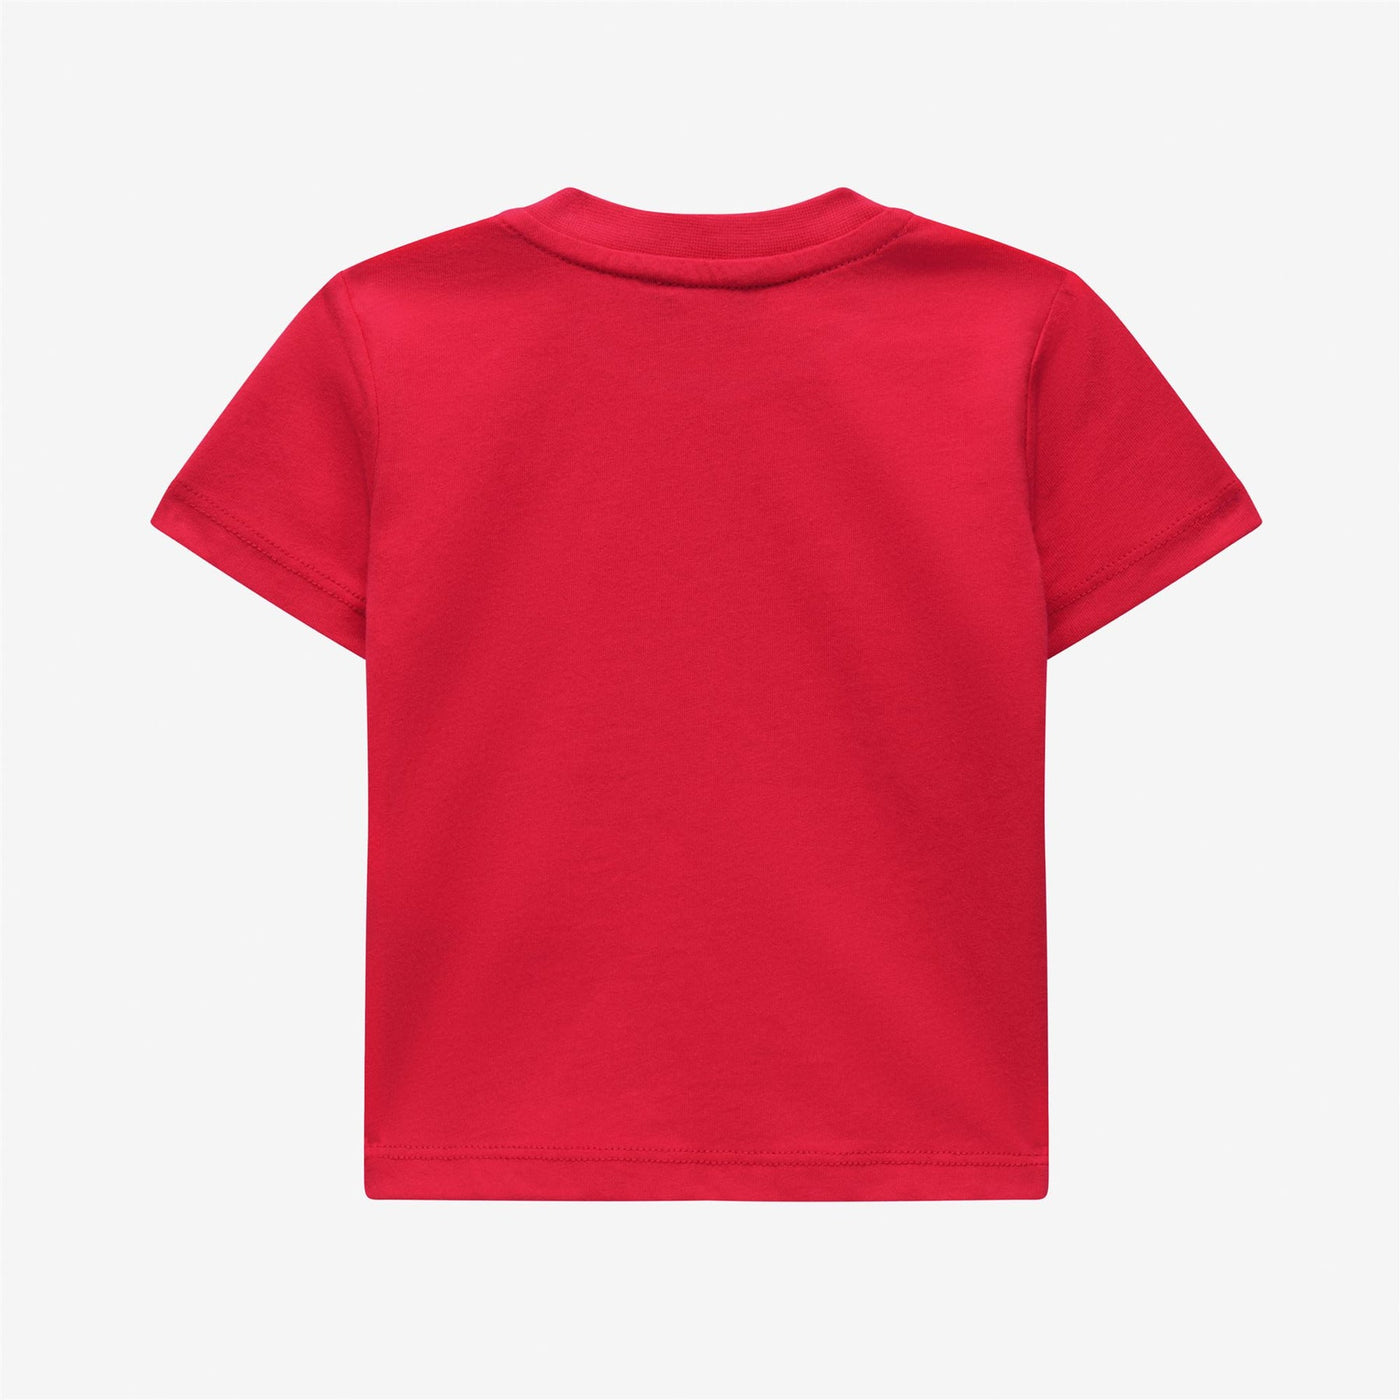 E. PETE - T-SHIRTS & TOP - KIDS UNISEX - RED BERRY